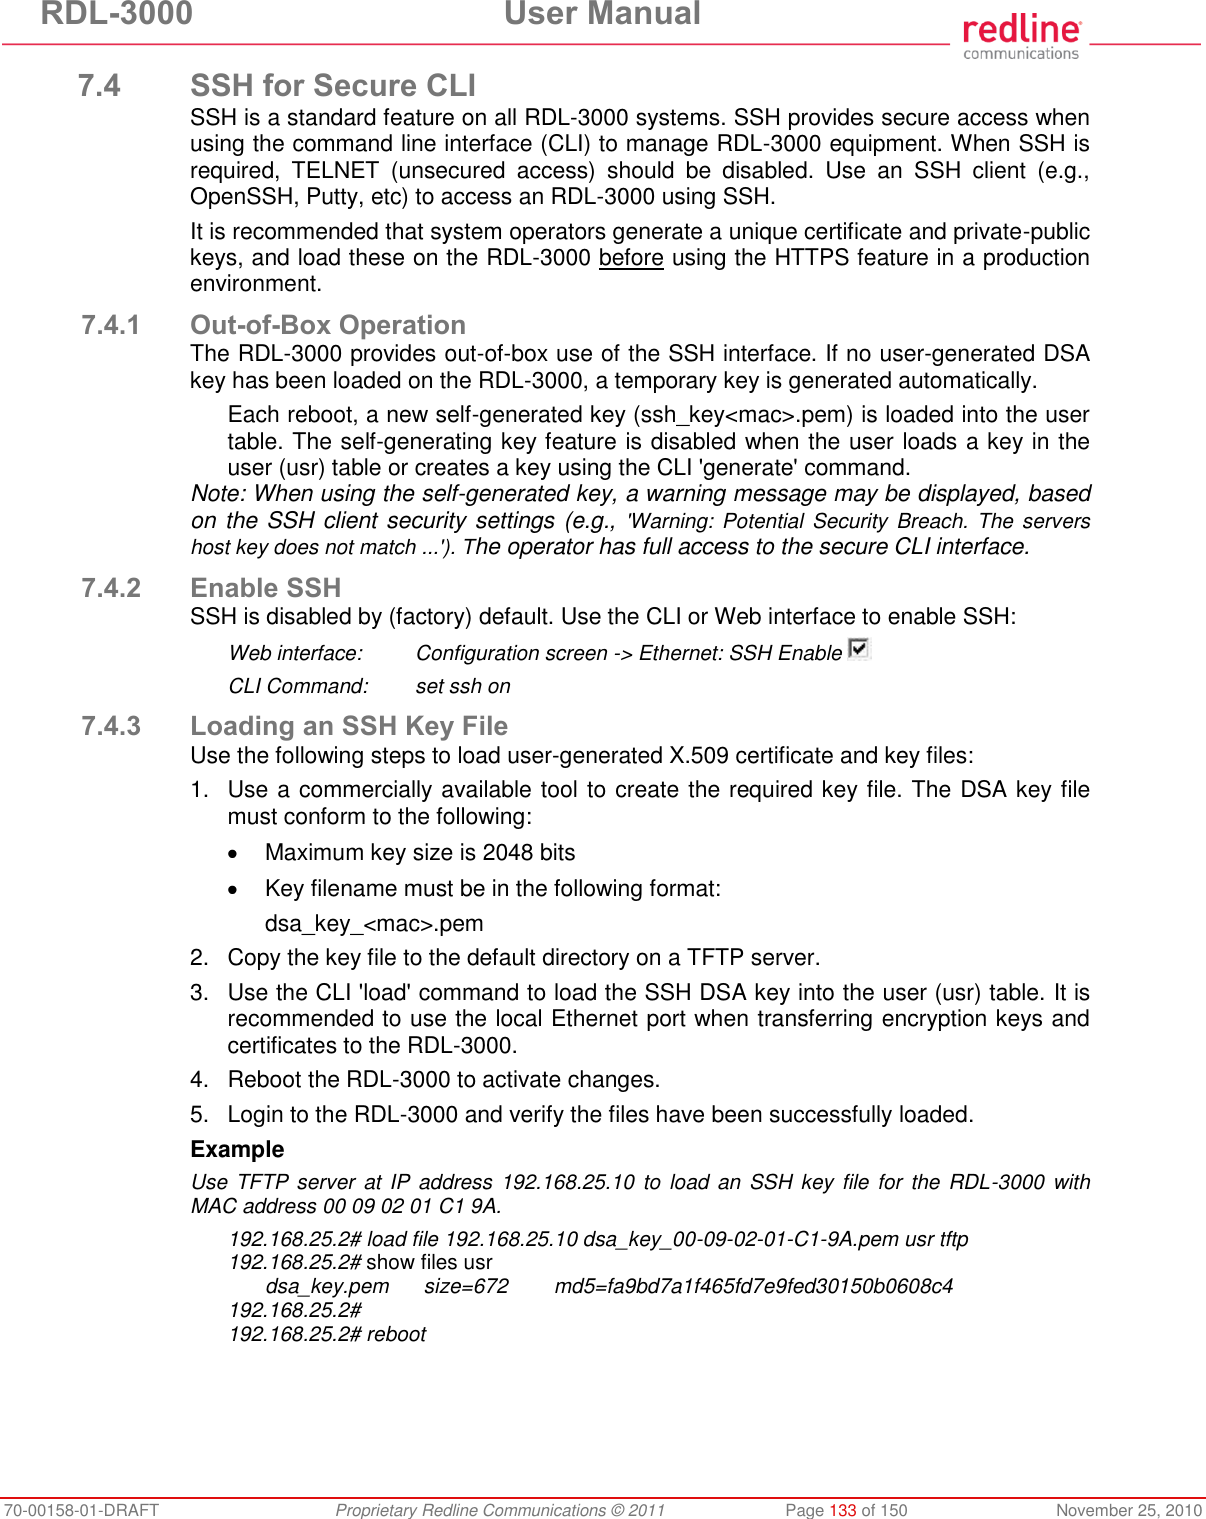 RDL-3000  User Manual 70-00158-01-DRAFT  Proprietary Redline Communications © 2011  Page 133 of 150  November 25, 2010 7.4 SSH for Secure CLI SSH is a standard feature on all RDL-3000 systems. SSH provides secure access when using the command line interface (CLI) to manage RDL-3000 equipment. When SSH is required,  TELNET  (unsecured  access)  should  be  disabled.  Use  an  SSH  client  (e.g., OpenSSH, Putty, etc) to access an RDL-3000 using SSH. It is recommended that system operators generate a unique certificate and private-public keys, and load these on the RDL-3000 before using the HTTPS feature in a production environment. 7.4.1 Out-of-Box Operation The RDL-3000 provides out-of-box use of the SSH interface. If no user-generated DSA key has been loaded on the RDL-3000, a temporary key is generated automatically. Each reboot, a new self-generated key (ssh_key&lt;mac&gt;.pem) is loaded into the user table. The self-generating key feature is disabled when the user loads a key in the user (usr) table or creates a key using the CLI &apos;generate&apos; command. Note: When using the self-generated key, a warning message may be displayed, based on the SSH client security settings (e.g., &apos;Warning:  Potential  Security  Breach.  The  servers host key does not match ...&apos;). The operator has full access to the secure CLI interface. 7.4.2 Enable SSH SSH is disabled by (factory) default. Use the CLI or Web interface to enable SSH: Web interface:  Configuration screen -&gt; Ethernet: SSH Enable   CLI Command:  set ssh on 7.4.3 Loading an SSH Key File Use the following steps to load user-generated X.509 certificate and key files: 1.  Use a commercially available tool to create the required key file. The DSA key file must conform to the following:   Maximum key size is 2048 bits   Key filename must be in the following format: dsa_key_&lt;mac&gt;.pem 2.  Copy the key file to the default directory on a TFTP server. 3.  Use the CLI &apos;load&apos; command to load the SSH DSA key into the user (usr) table. It is recommended to use the local Ethernet port when transferring encryption keys and certificates to the RDL-3000. 4.  Reboot the RDL-3000 to activate changes. 5.  Login to the RDL-3000 and verify the files have been successfully loaded. Example Use TFTP  server  at IP address 192.168.25.10 to load  an  SSH key file  for the RDL-3000  with MAC address 00 09 02 01 C1 9A. 192.168.25.2# load file 192.168.25.10 dsa_key_00-09-02-01-C1-9A.pem usr tftp 192.168.25.2# show files usr   dsa_key.pem      size=672        md5=fa9bd7a1f465fd7e9fed30150b0608c4 192.168.25.2# 192.168.25.2# reboot 